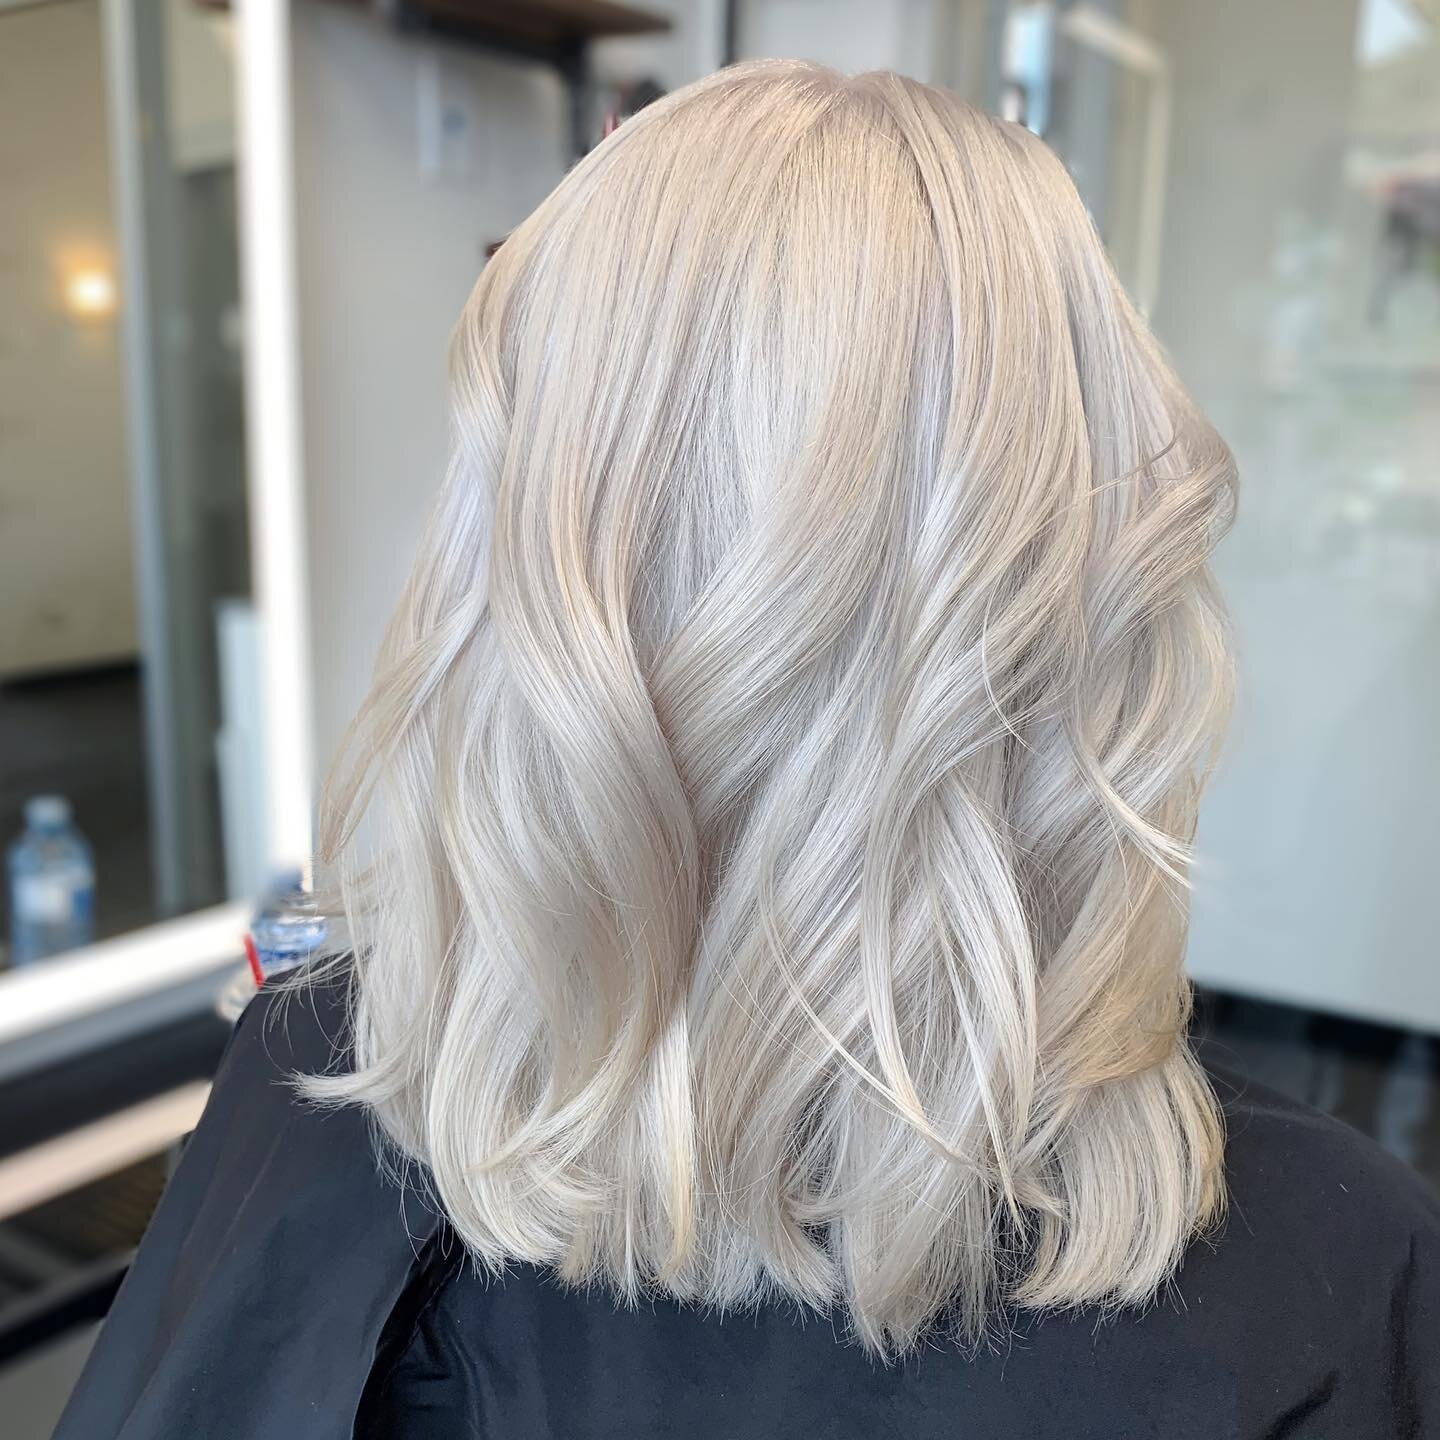 YAAASS, can&rsquo;t wait To have this beautiful blonde in my chair🥰💃🏼

#maykelmatoshair #solasalons #yychairstylist #yychairsalons #blondehair #lorealprofessionnel #haircolor #yycnow #hairstylistyyc